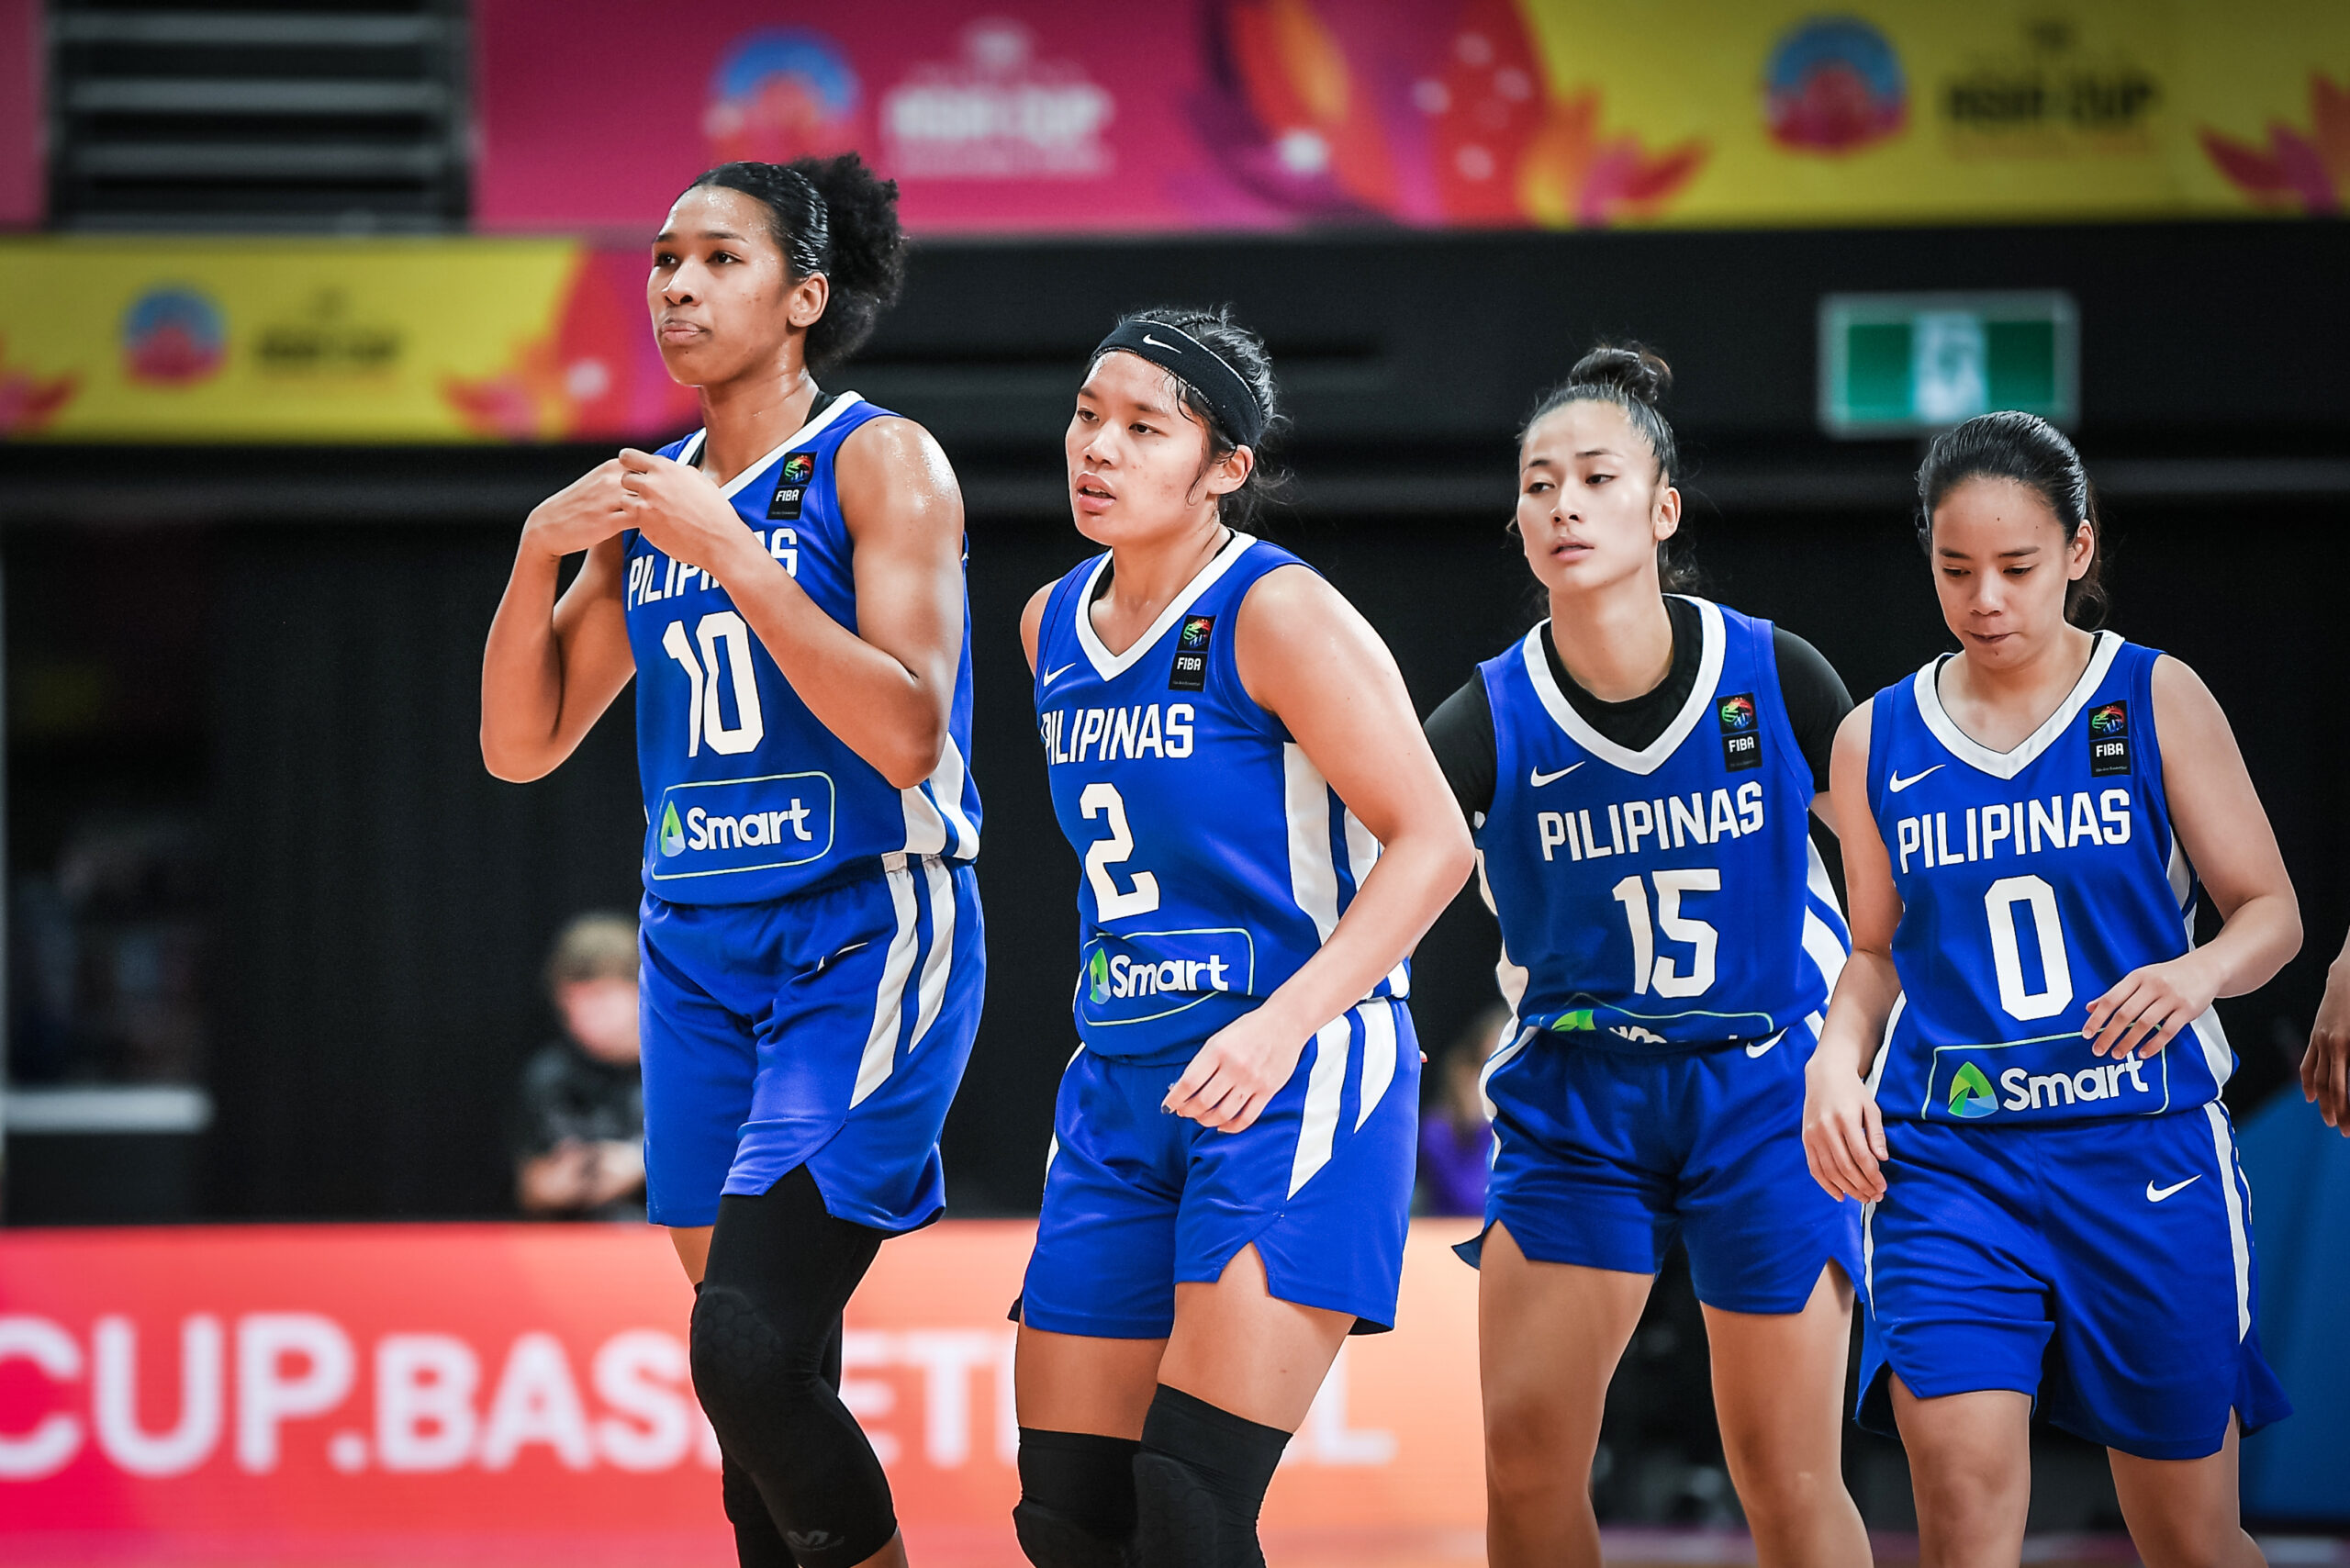 Gilas Women lose to ChineseTaipei A in their Jones Cup opener